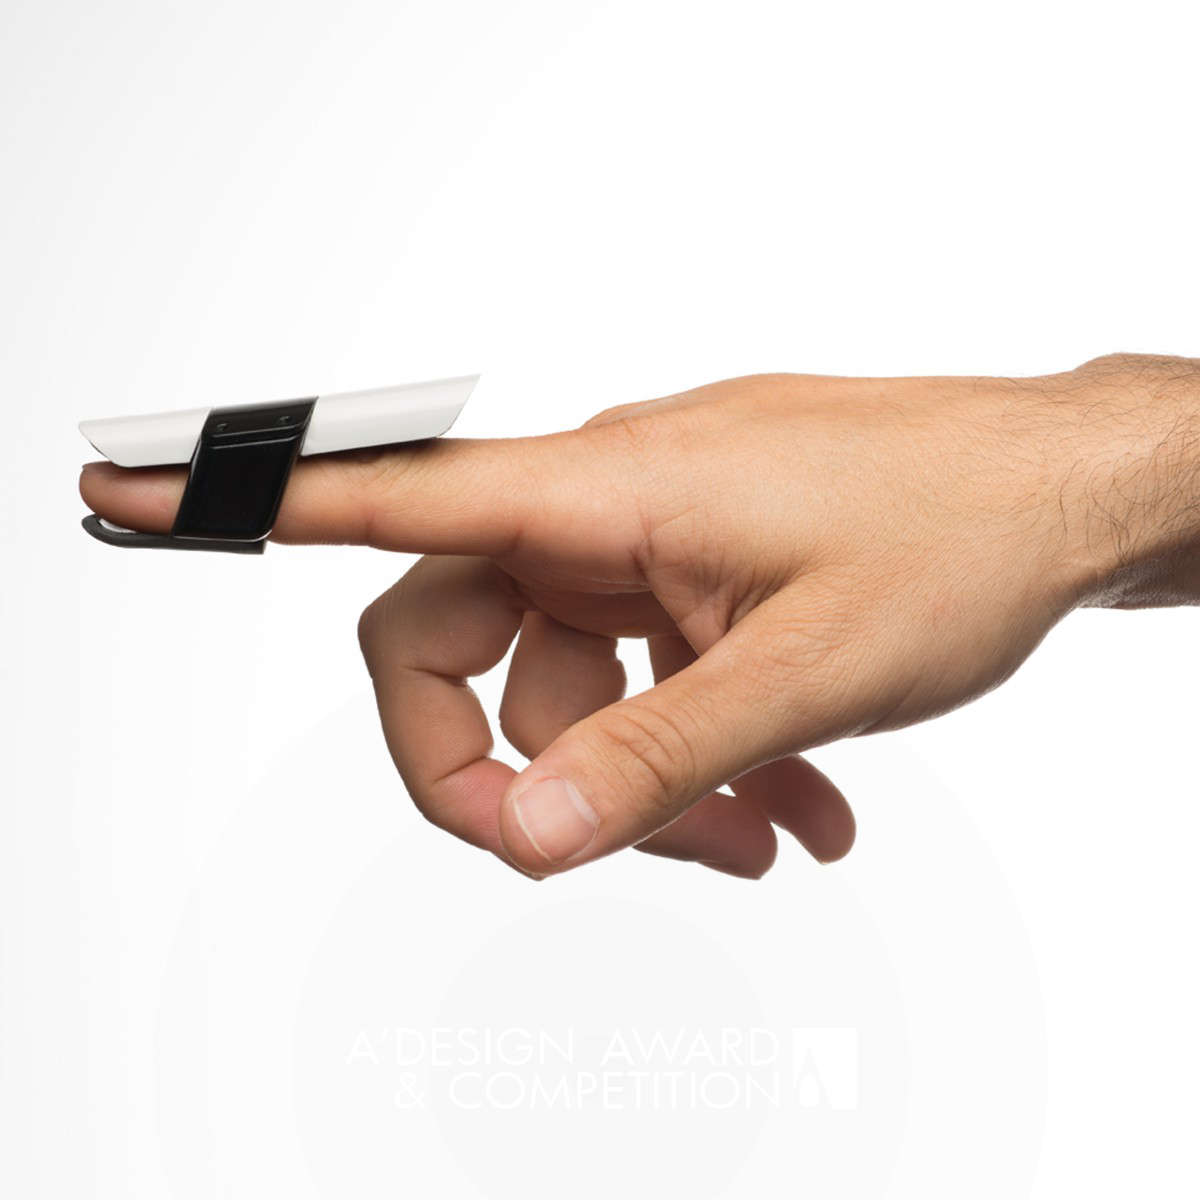 Bird Wearable input device by Prime.total product design